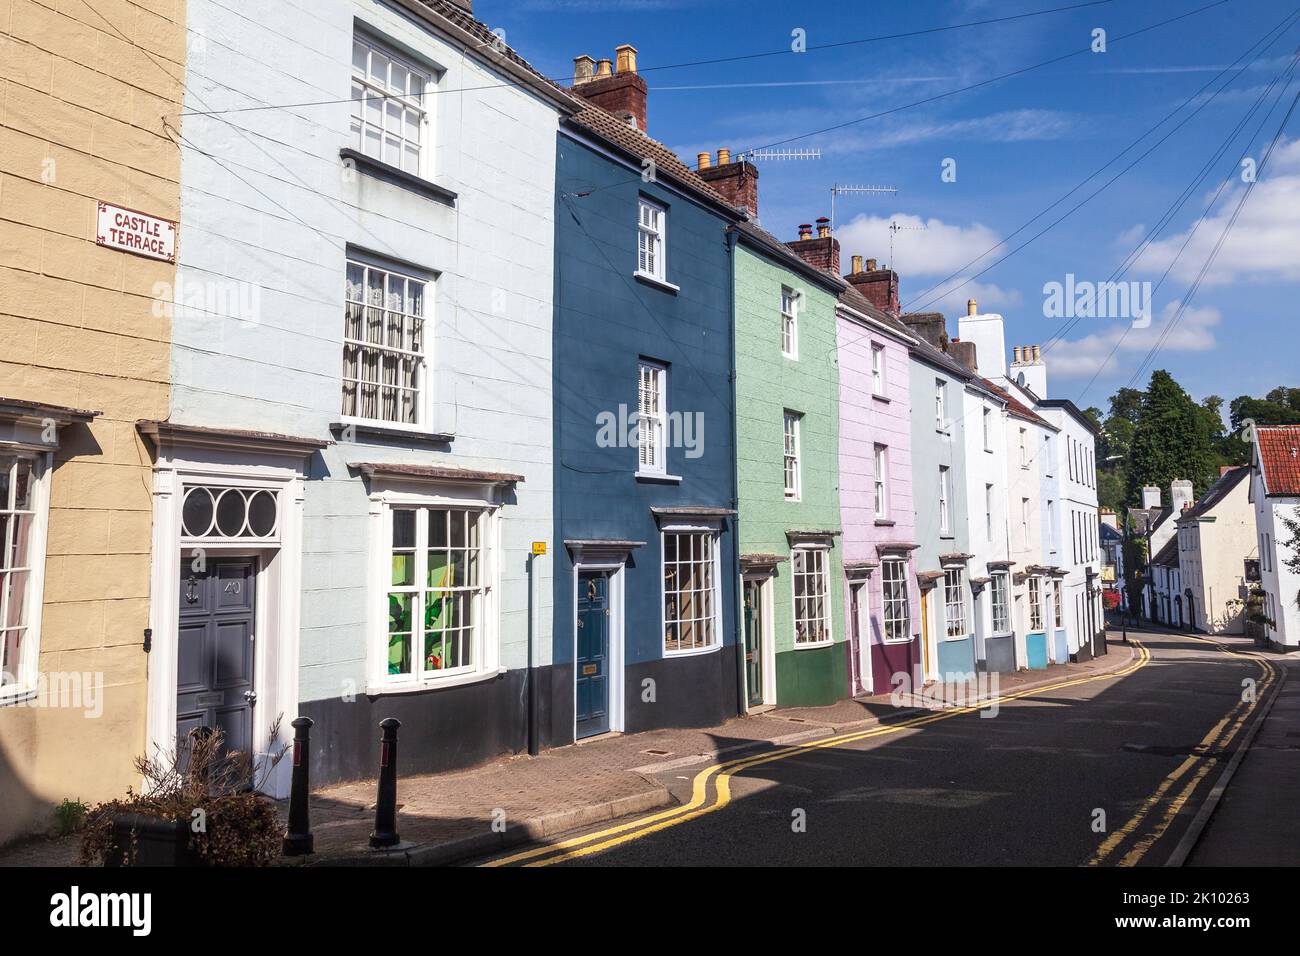 Castle Terrace, Chepstow, Monmouthshire, Wales, UK Stock Photo